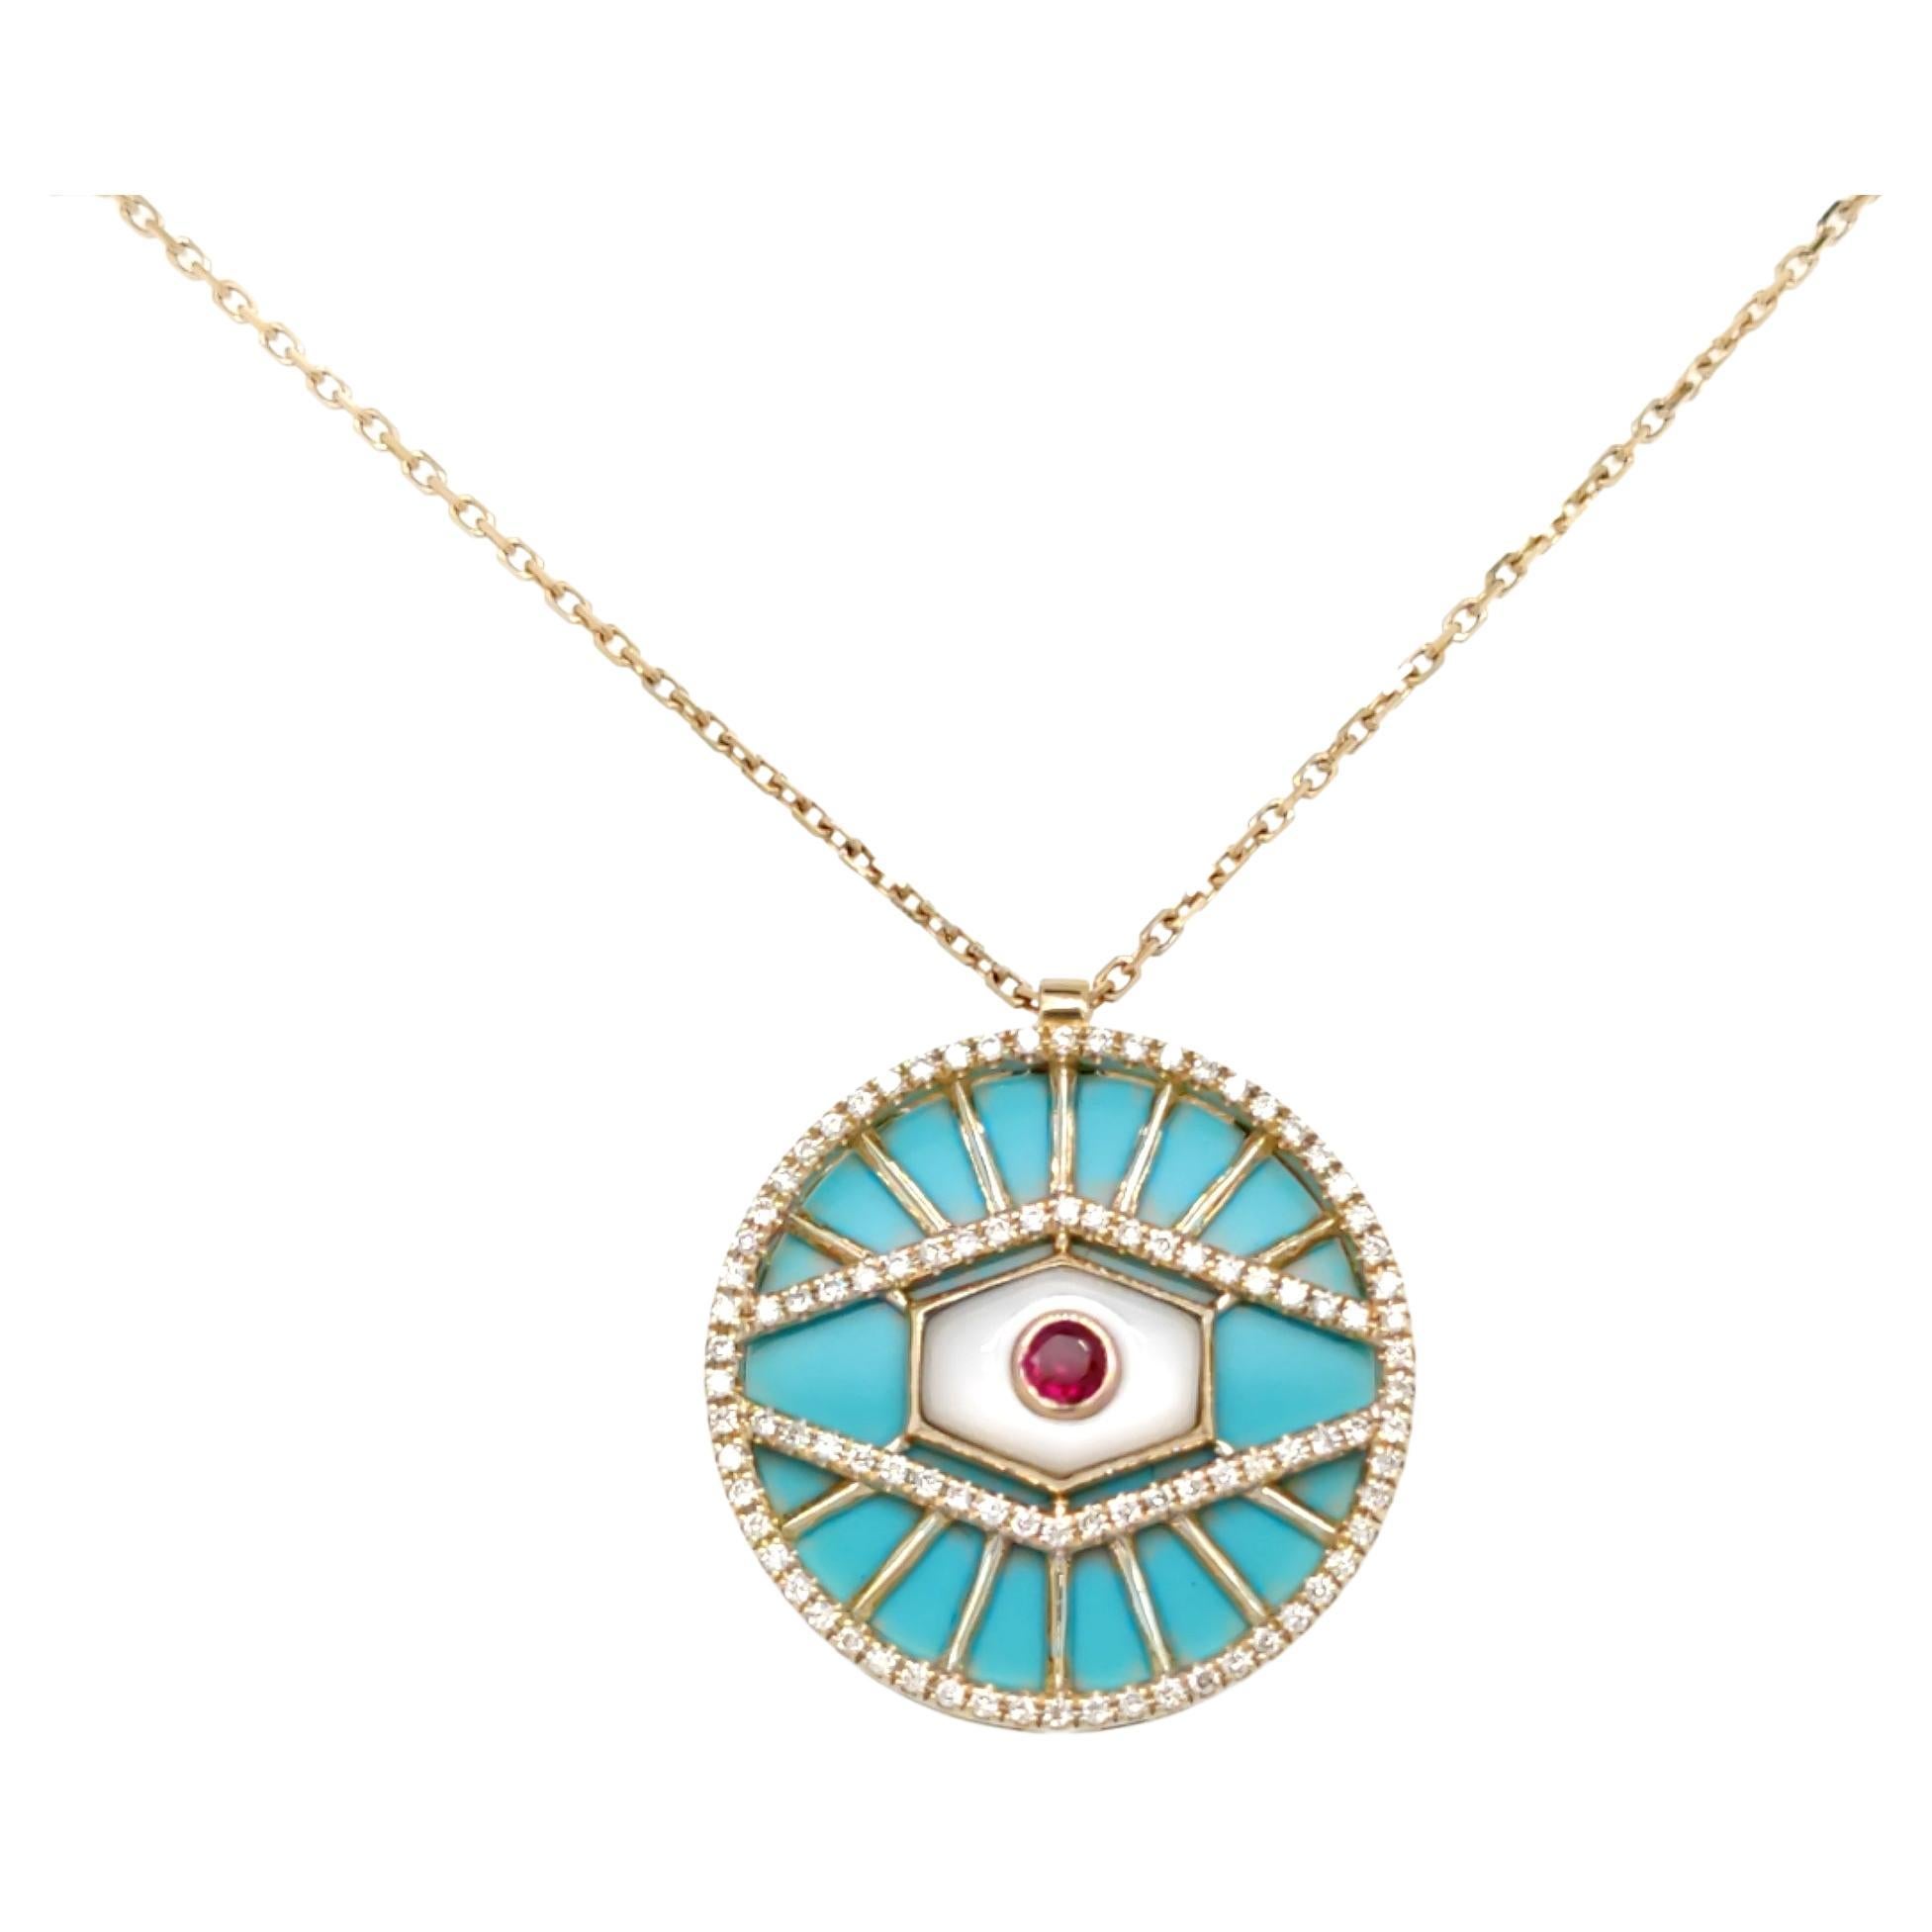 Pandora’s Emerald Evil Eye Necklace in 18K Yellow Gold with Diamonds ...